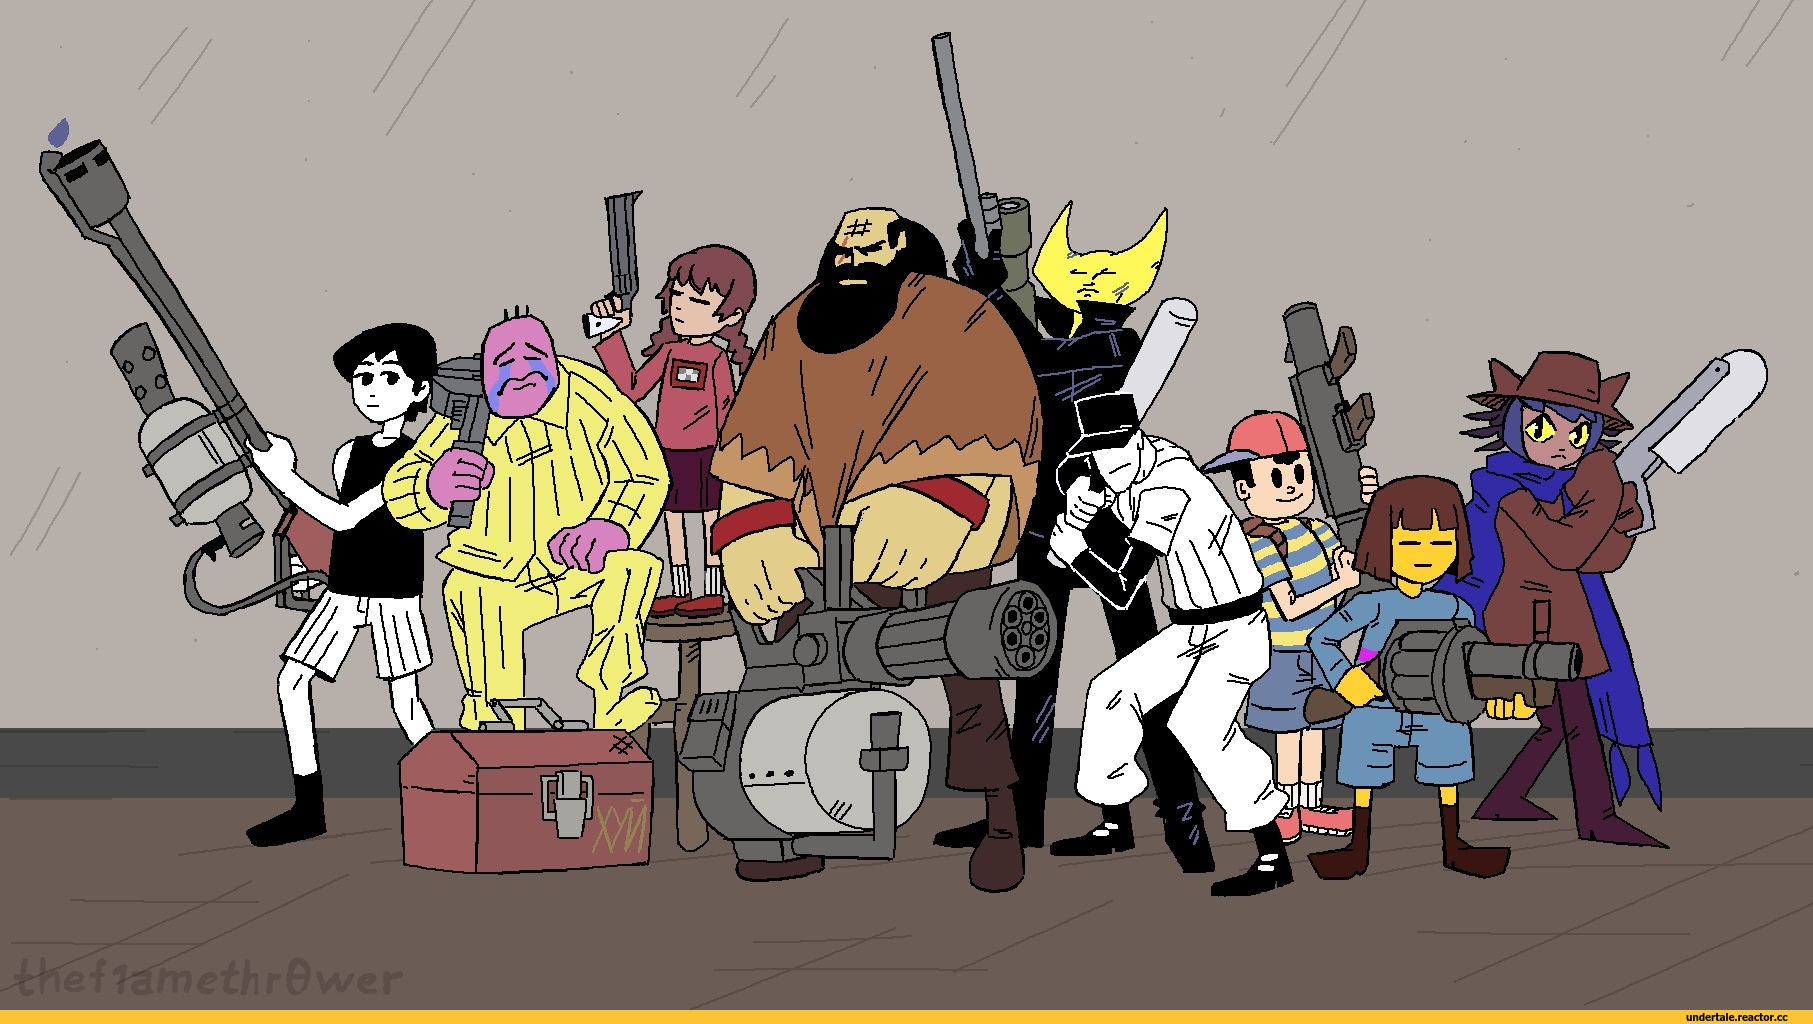 A little wallpaper i found of a bunch of rpg protags posing like the mercs from tf rlisathepainfulrpg